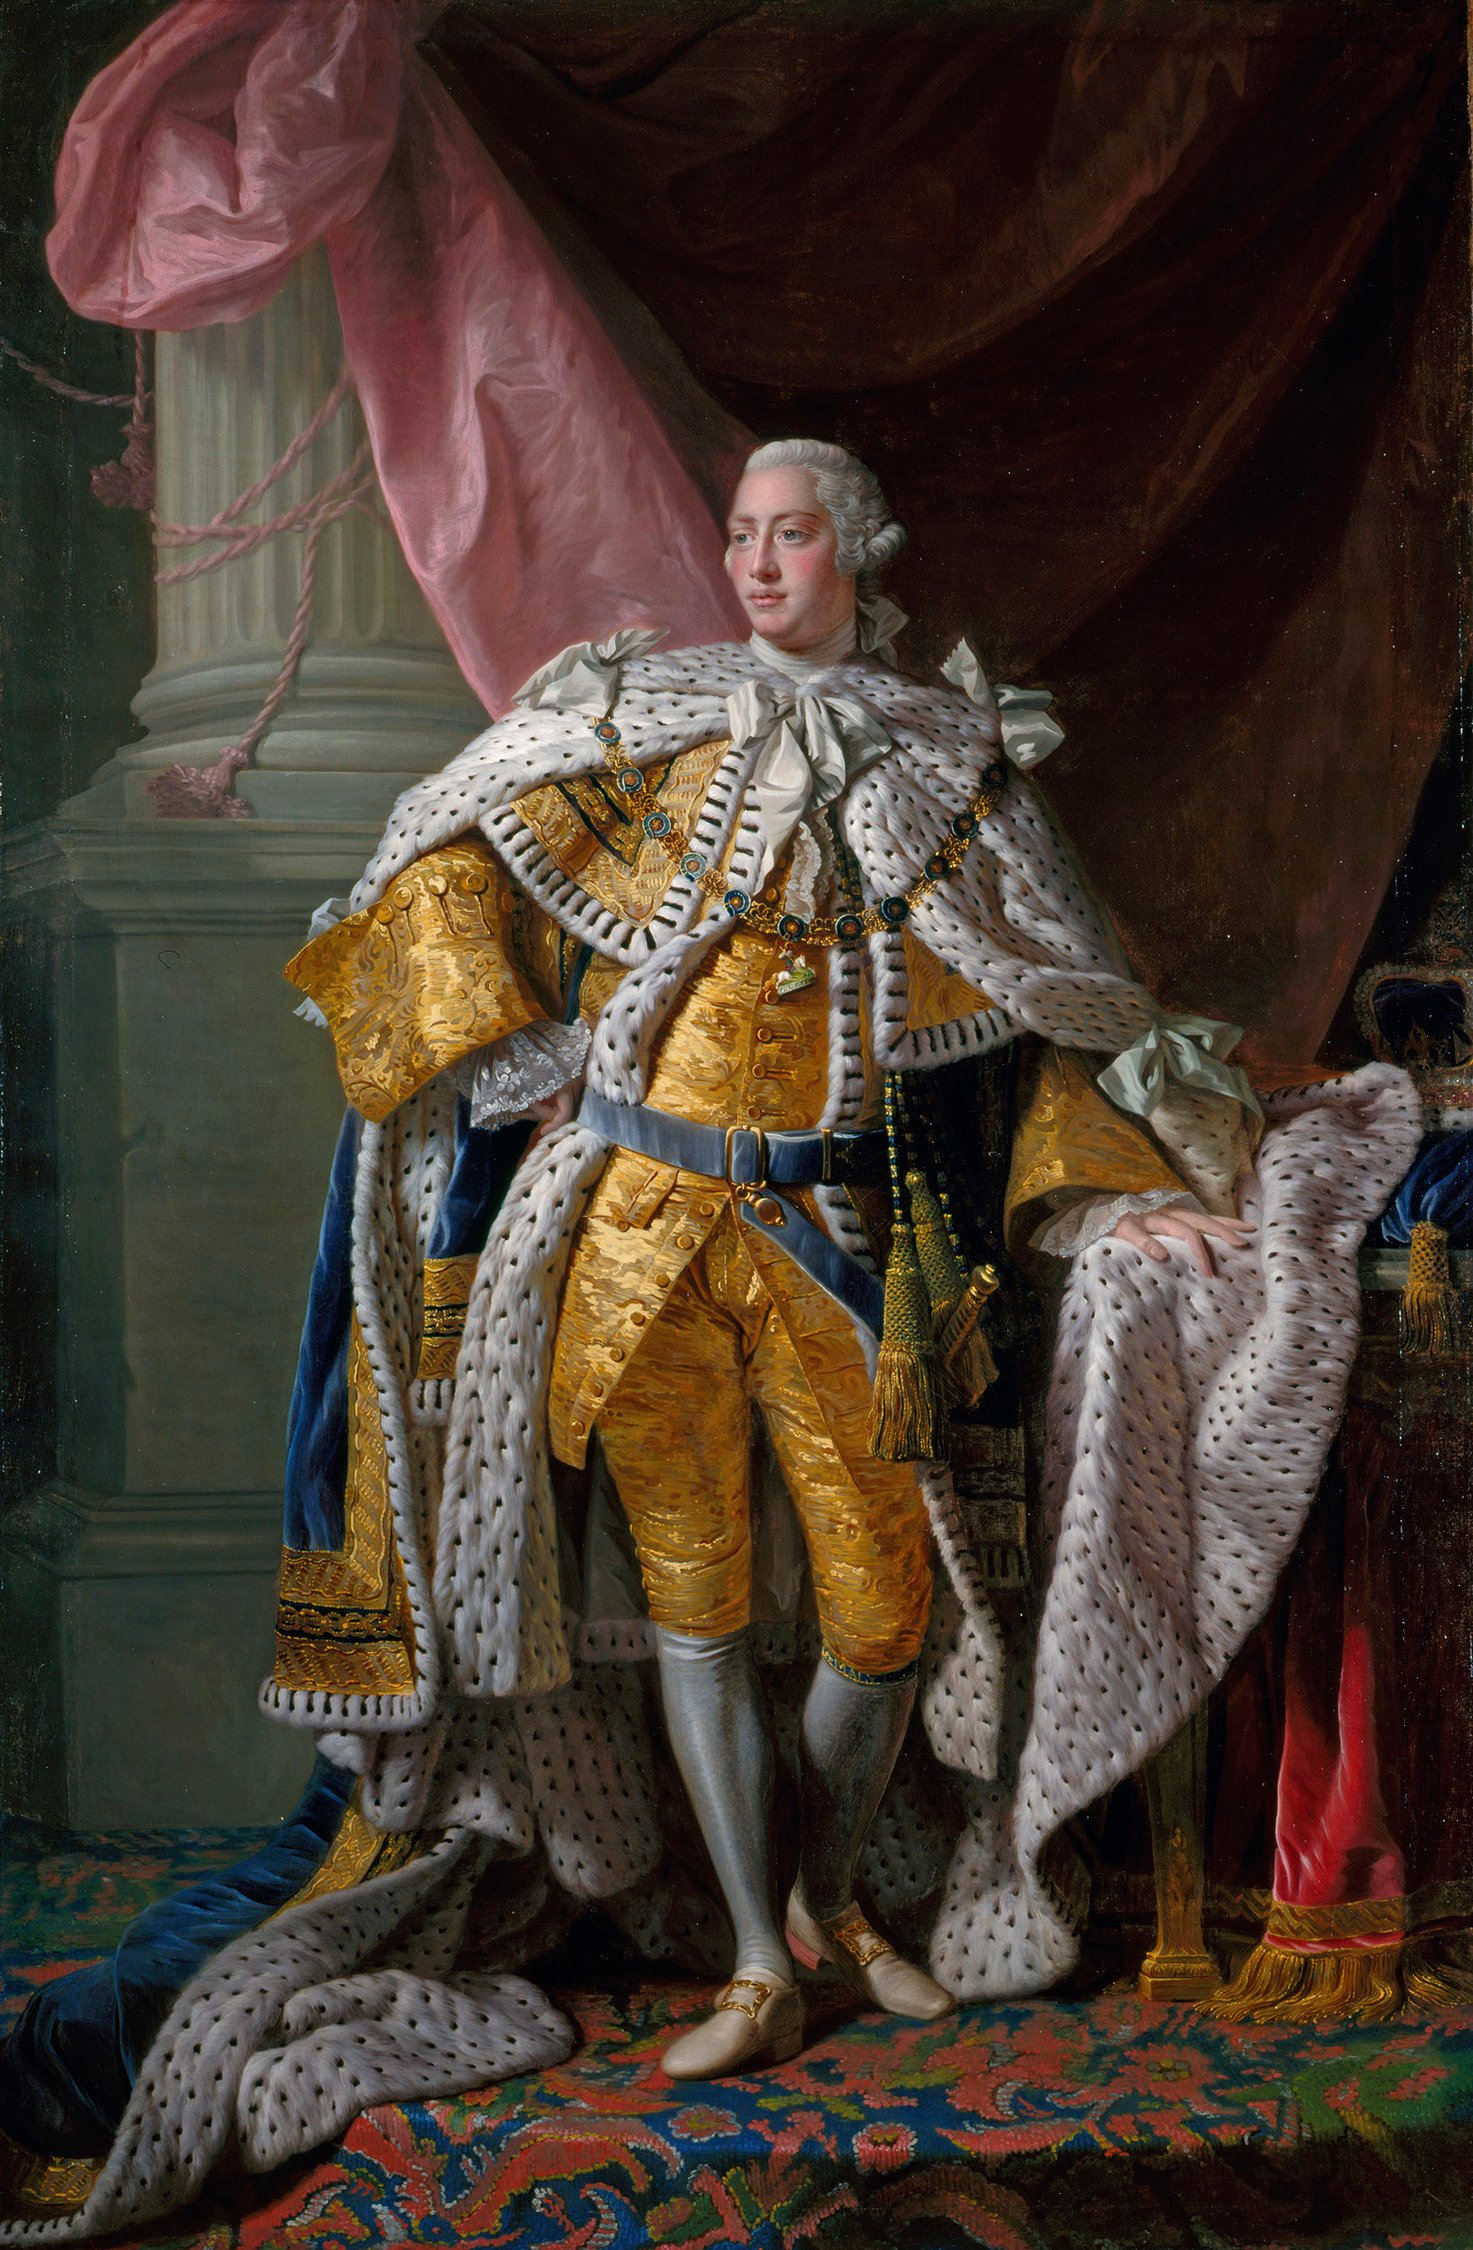 A painting of King George III.